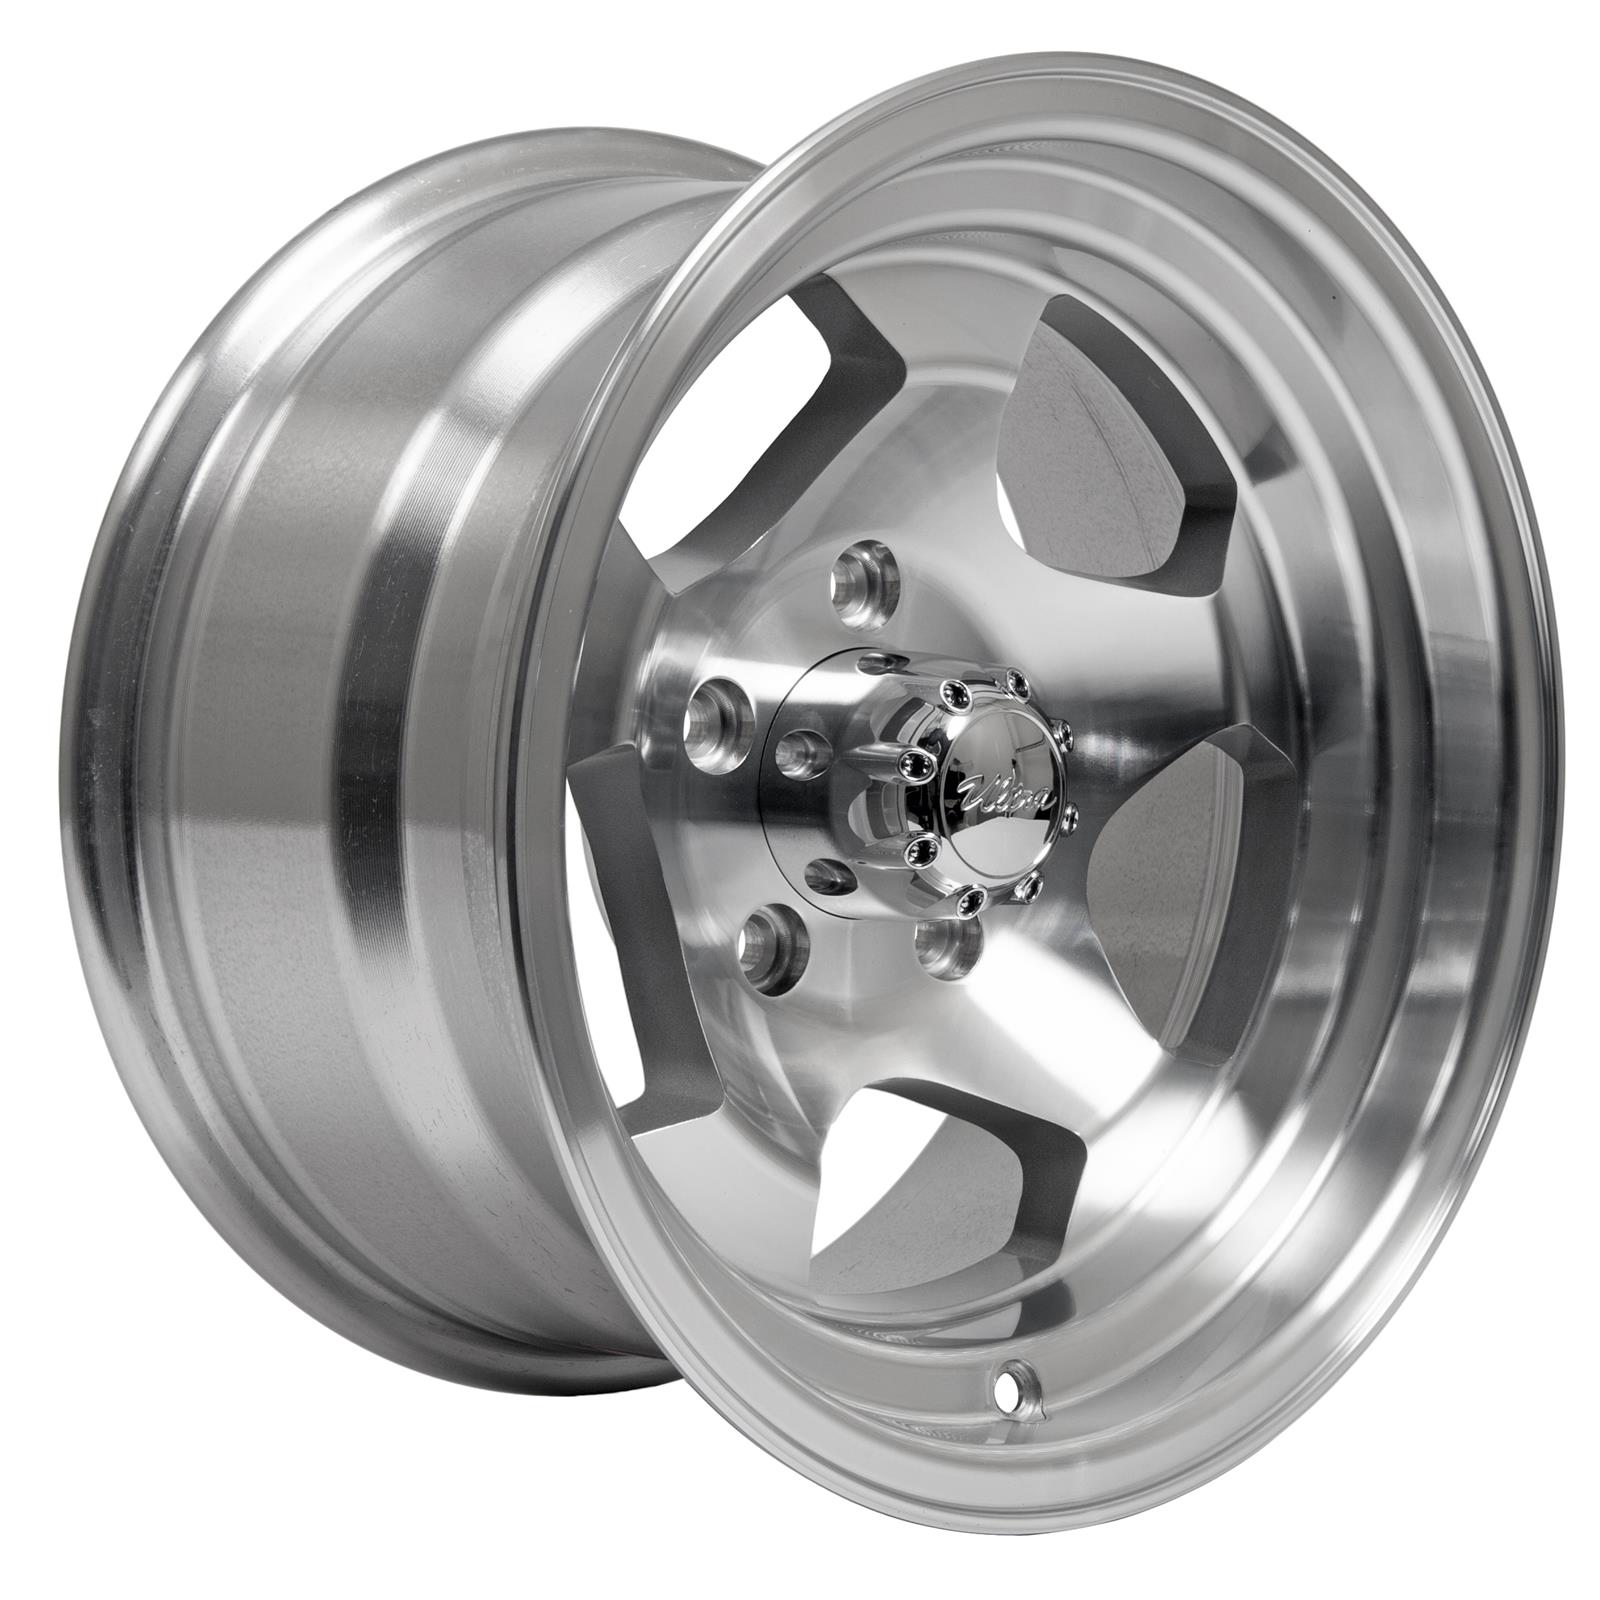 ExoForma - 💥 Deal of the Week 💥 Don't miss this Wheel